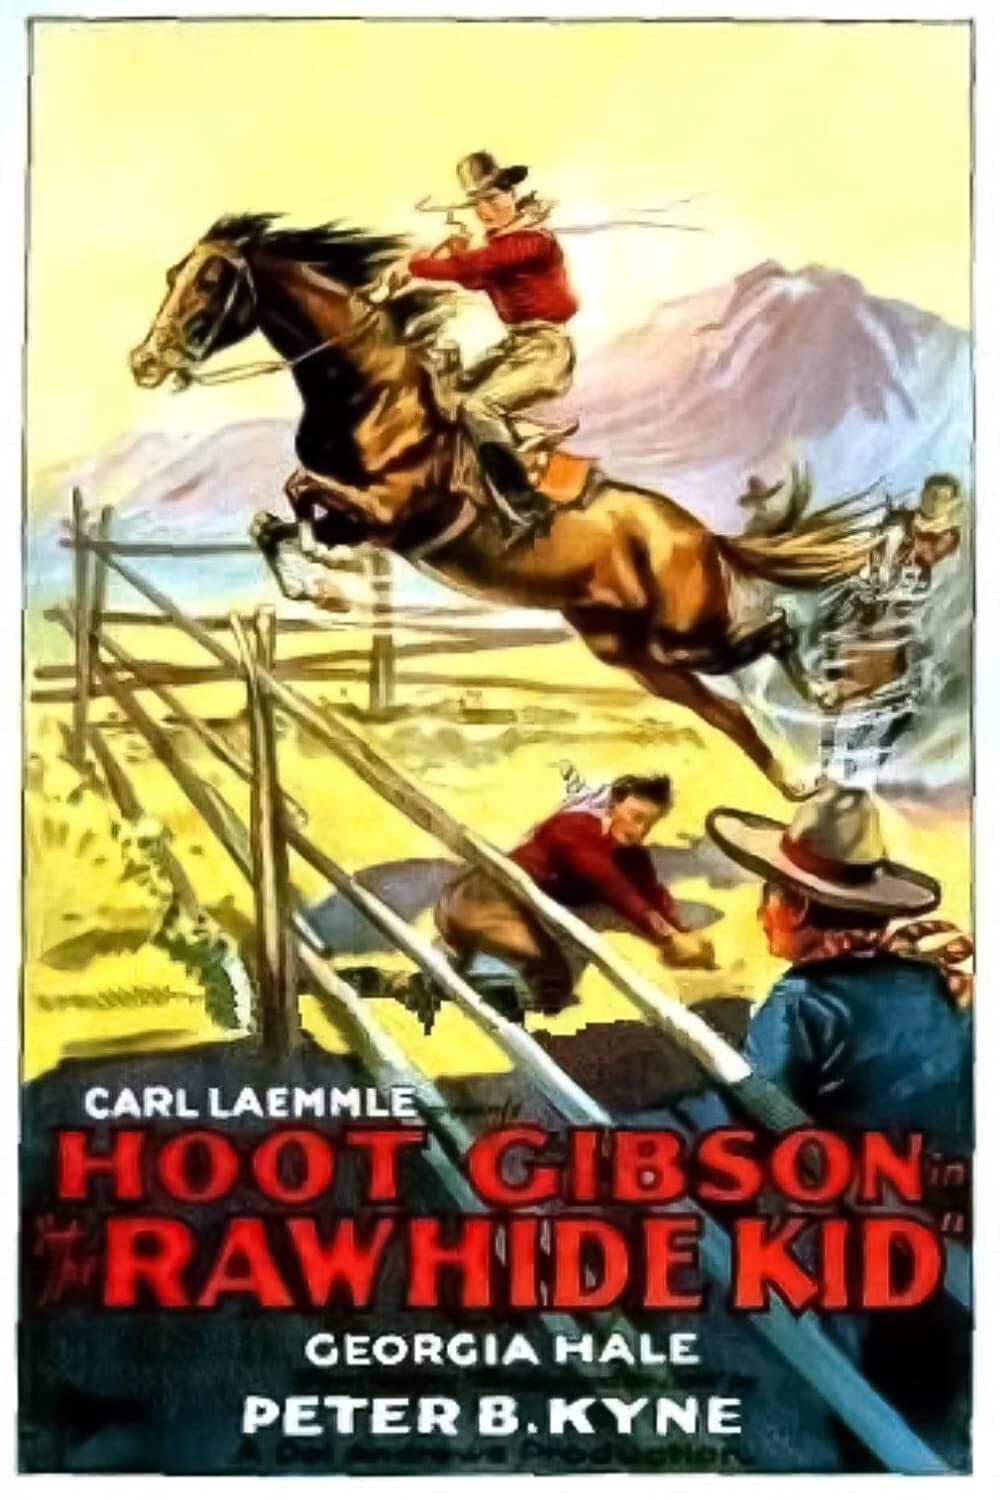 The Rawhide Kid poster